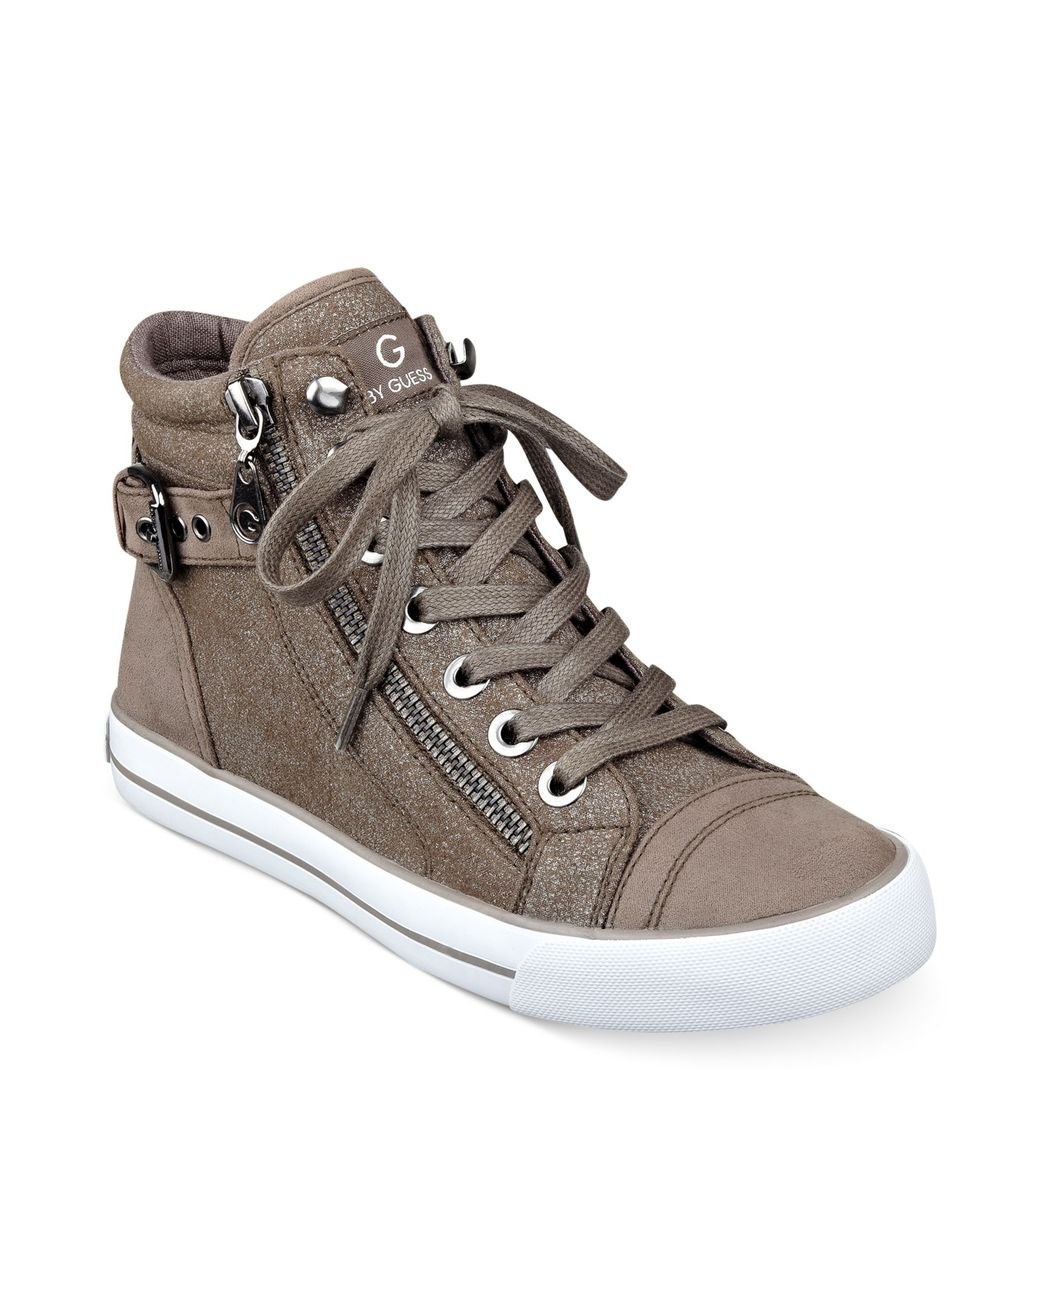 GUESS Women's Pathin Lace-Up Sneakers - Macy's | Womens sneakers, Guess  shoes, Sneakers